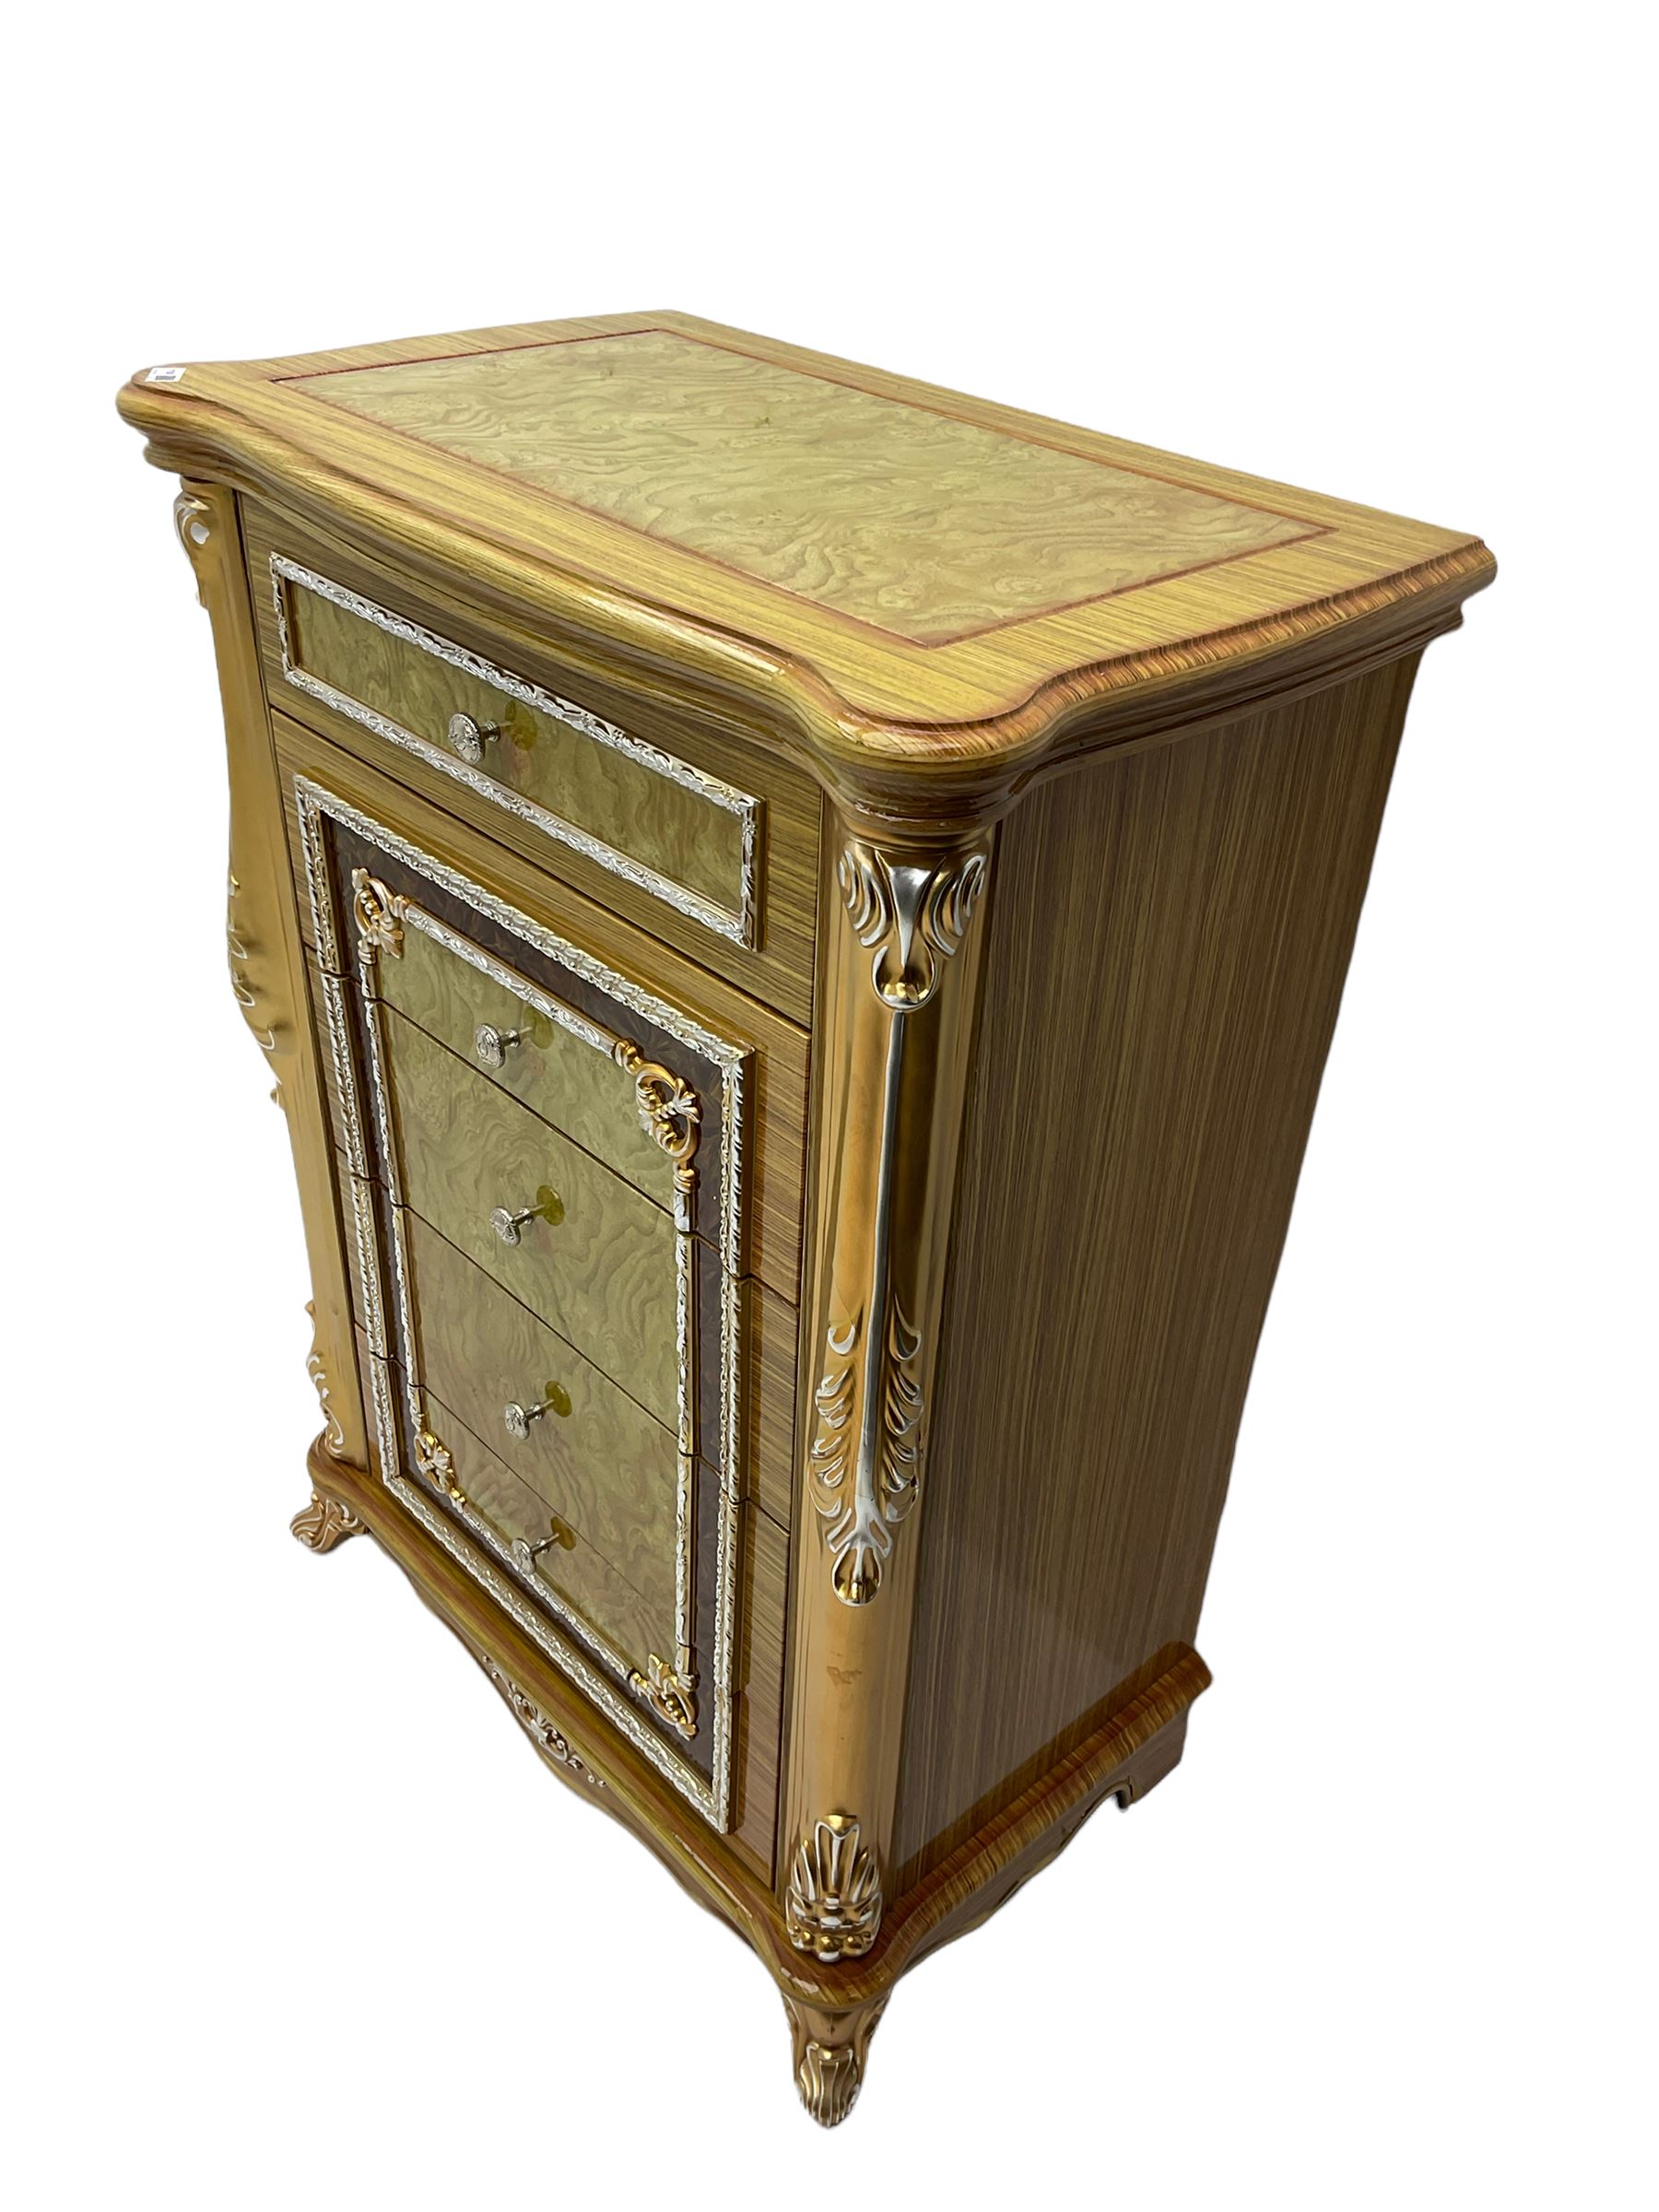 Rococo style wood finish chest - Image 5 of 7